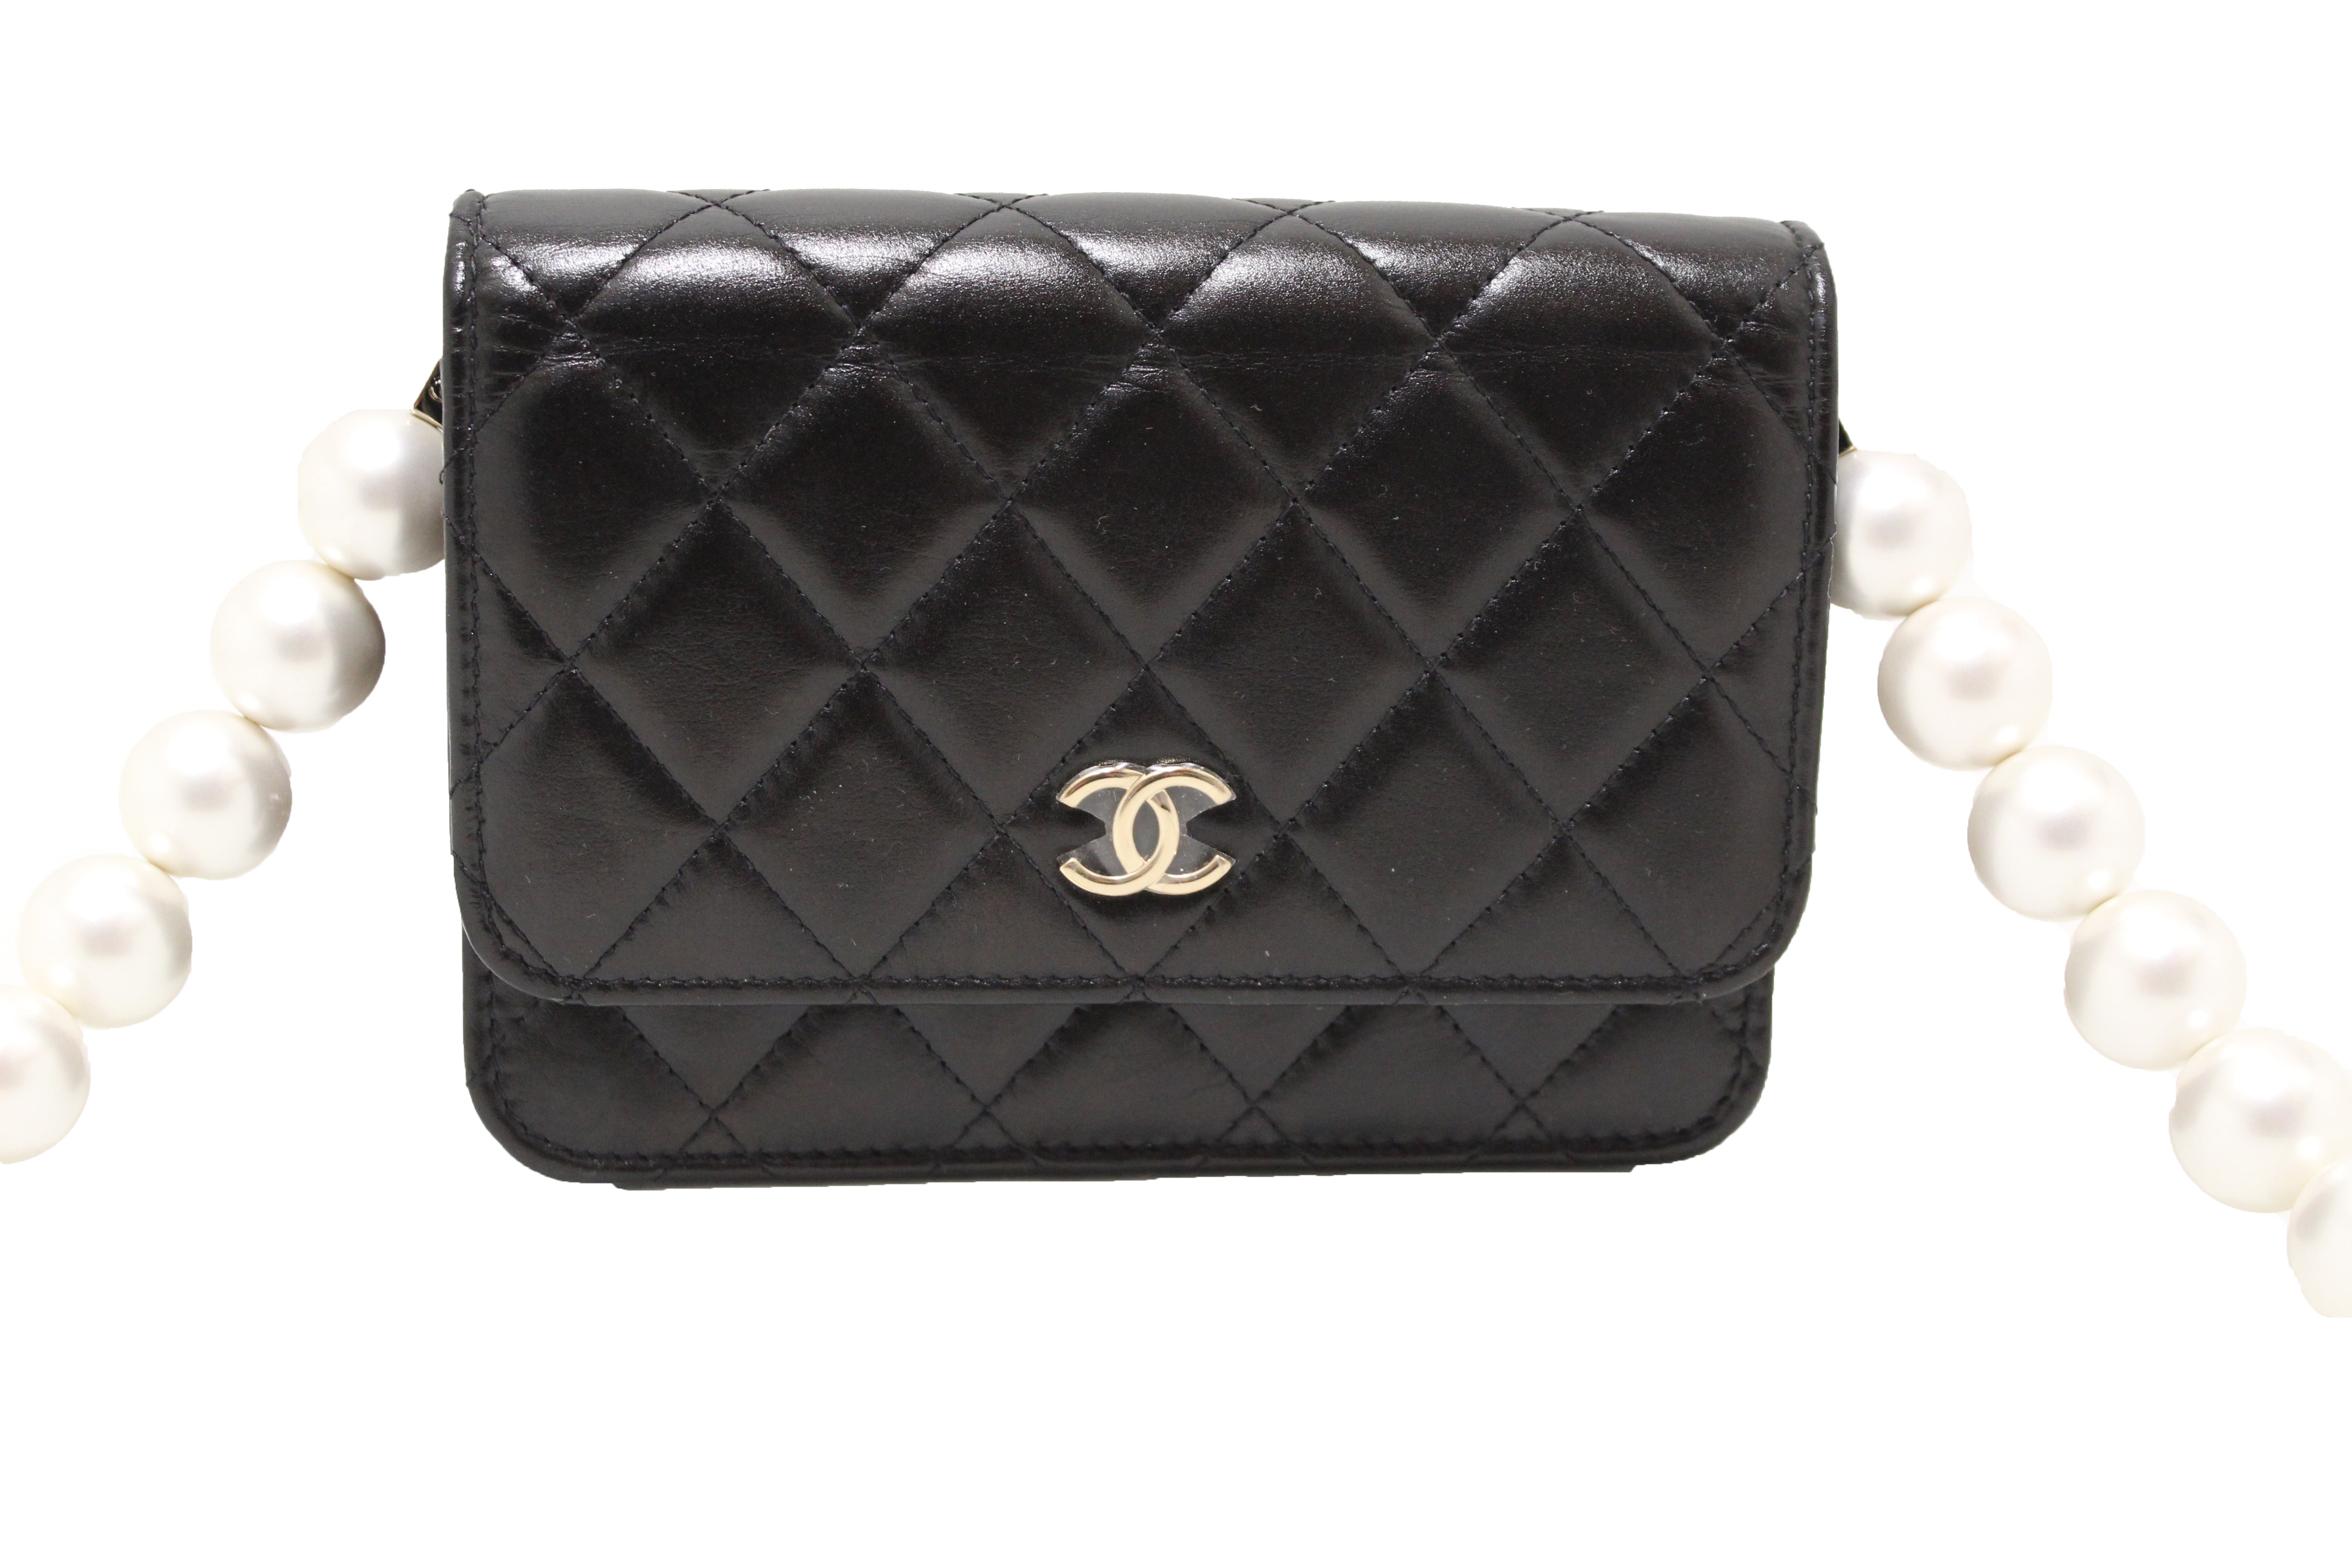 Authentic Chanel Black Quilted Calfskin Leather Wallet with Pearl